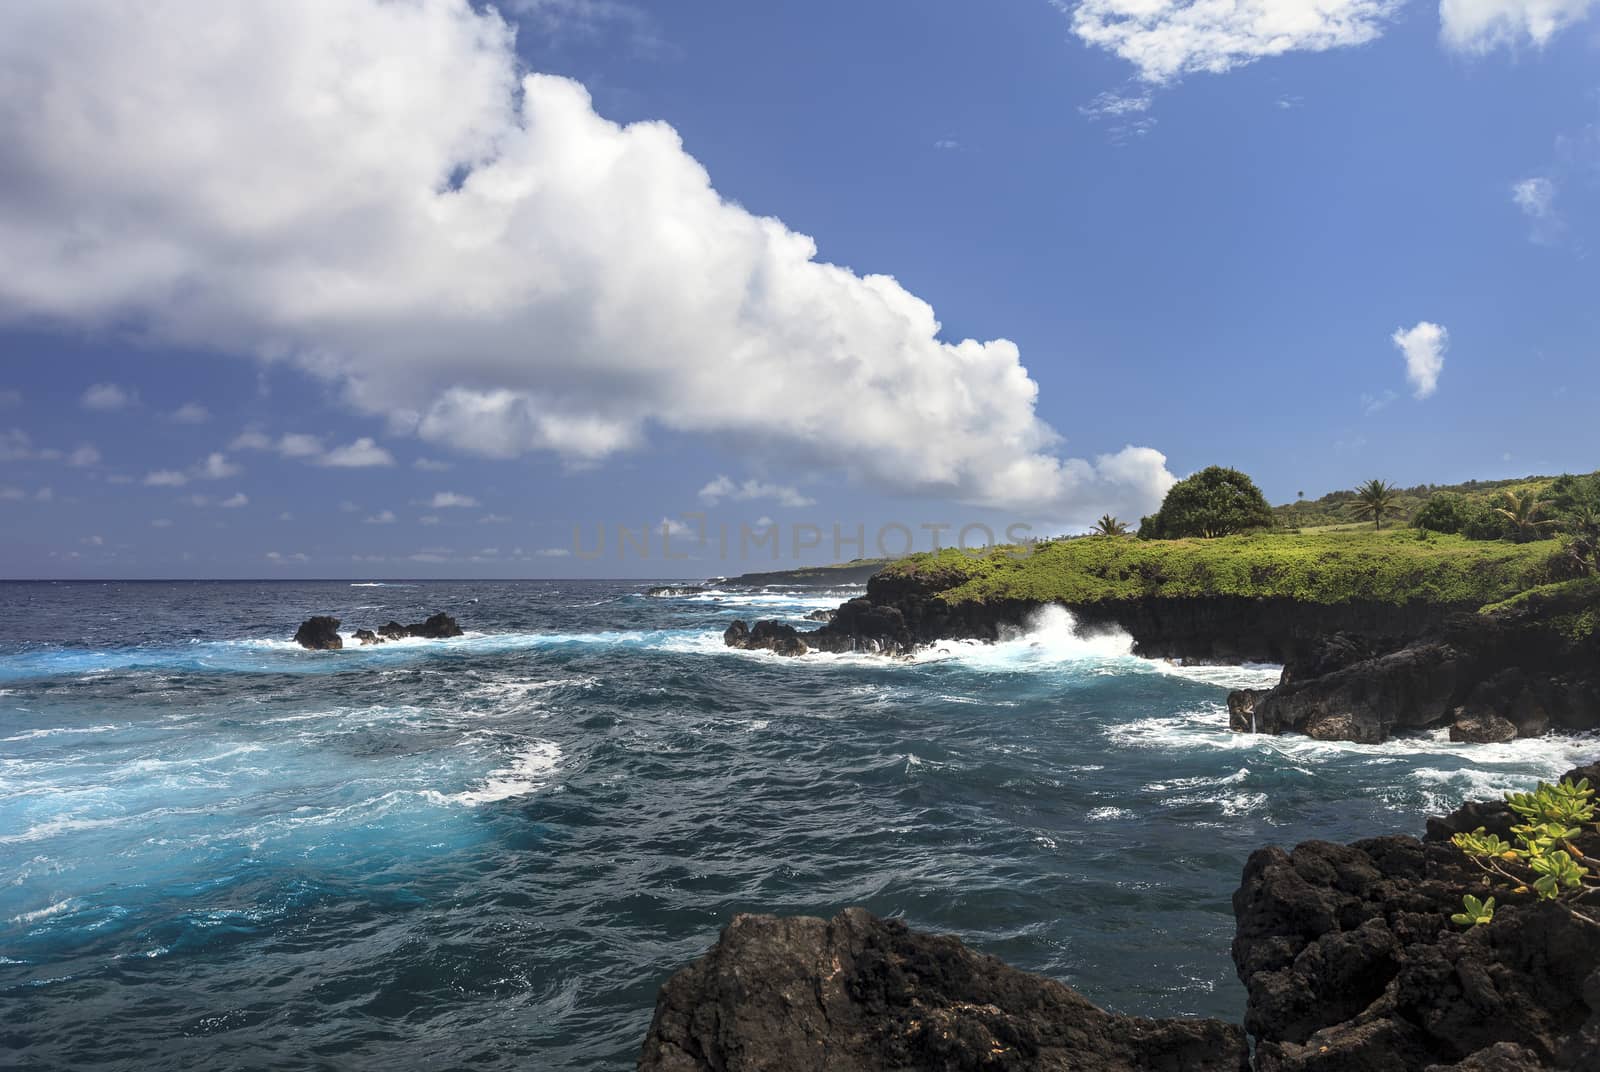 This is an image of Waianapanapa State Park, located in Hana on the island of Maui, Hawaii. Below is one of the parks most exciting areas due to its rocky and rugged cliffs.